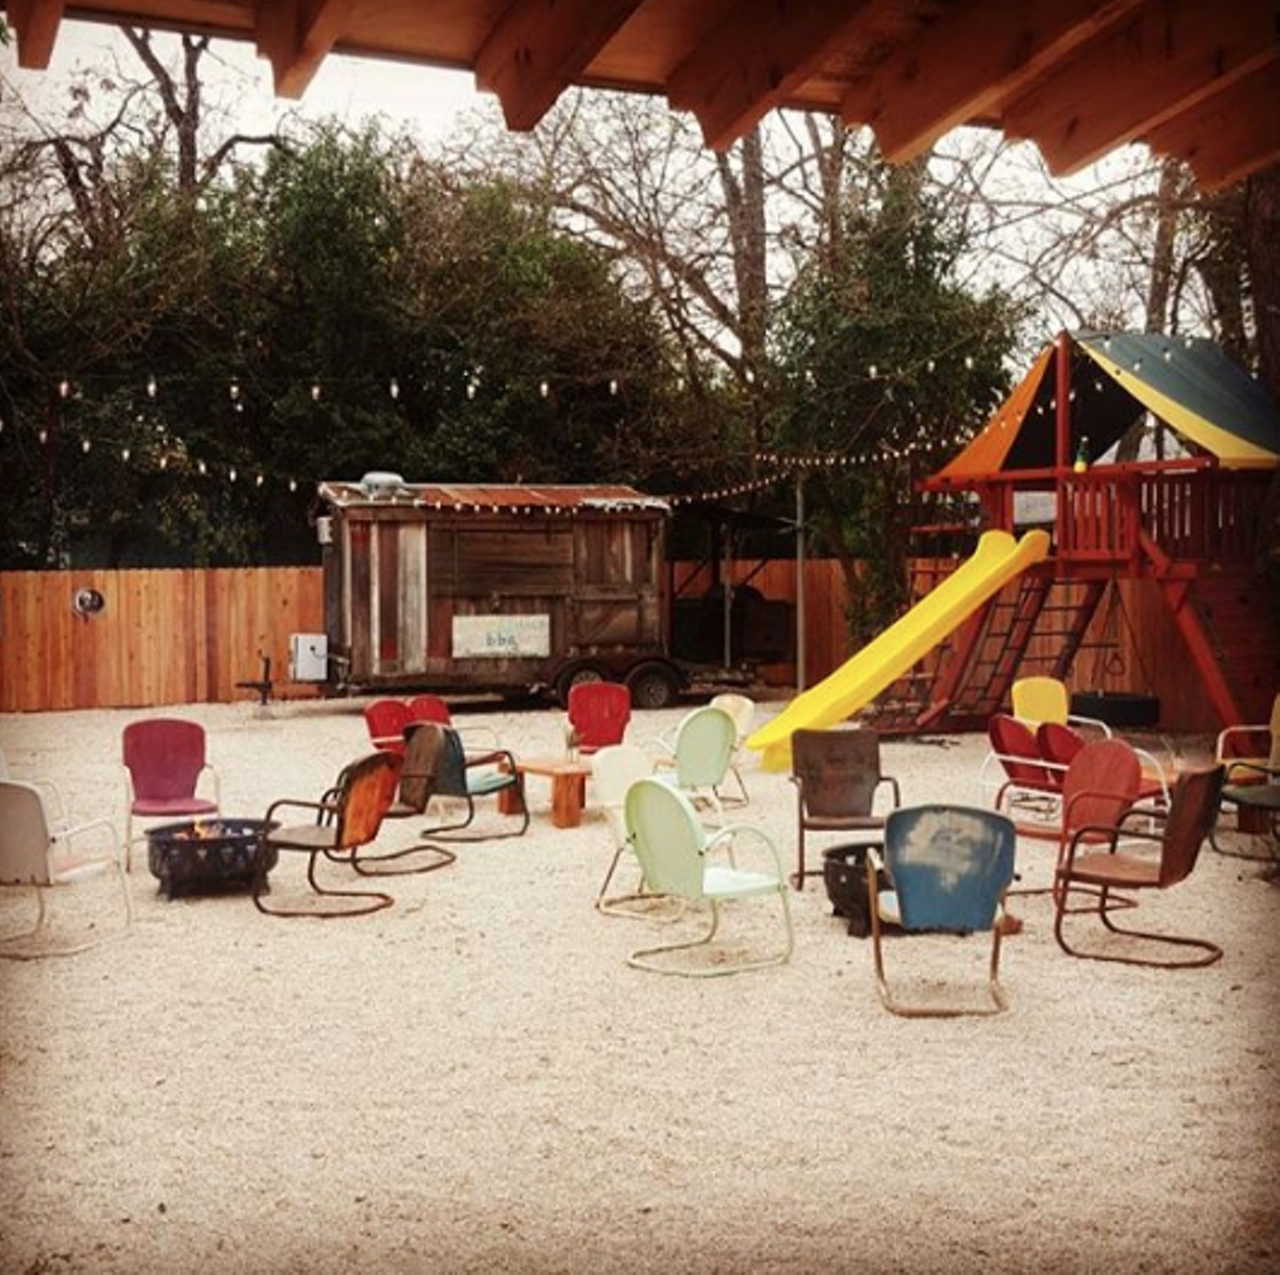 The Pig Pen
106 Pershing Ave., (210) 267-9136
The Pigpen has a large outdoor area, equipped with a slide and playground to keep kids entertained while parents can sip on some brews and chow down on food truck snacks.
Photo via Instagram/the_pigpen_bar